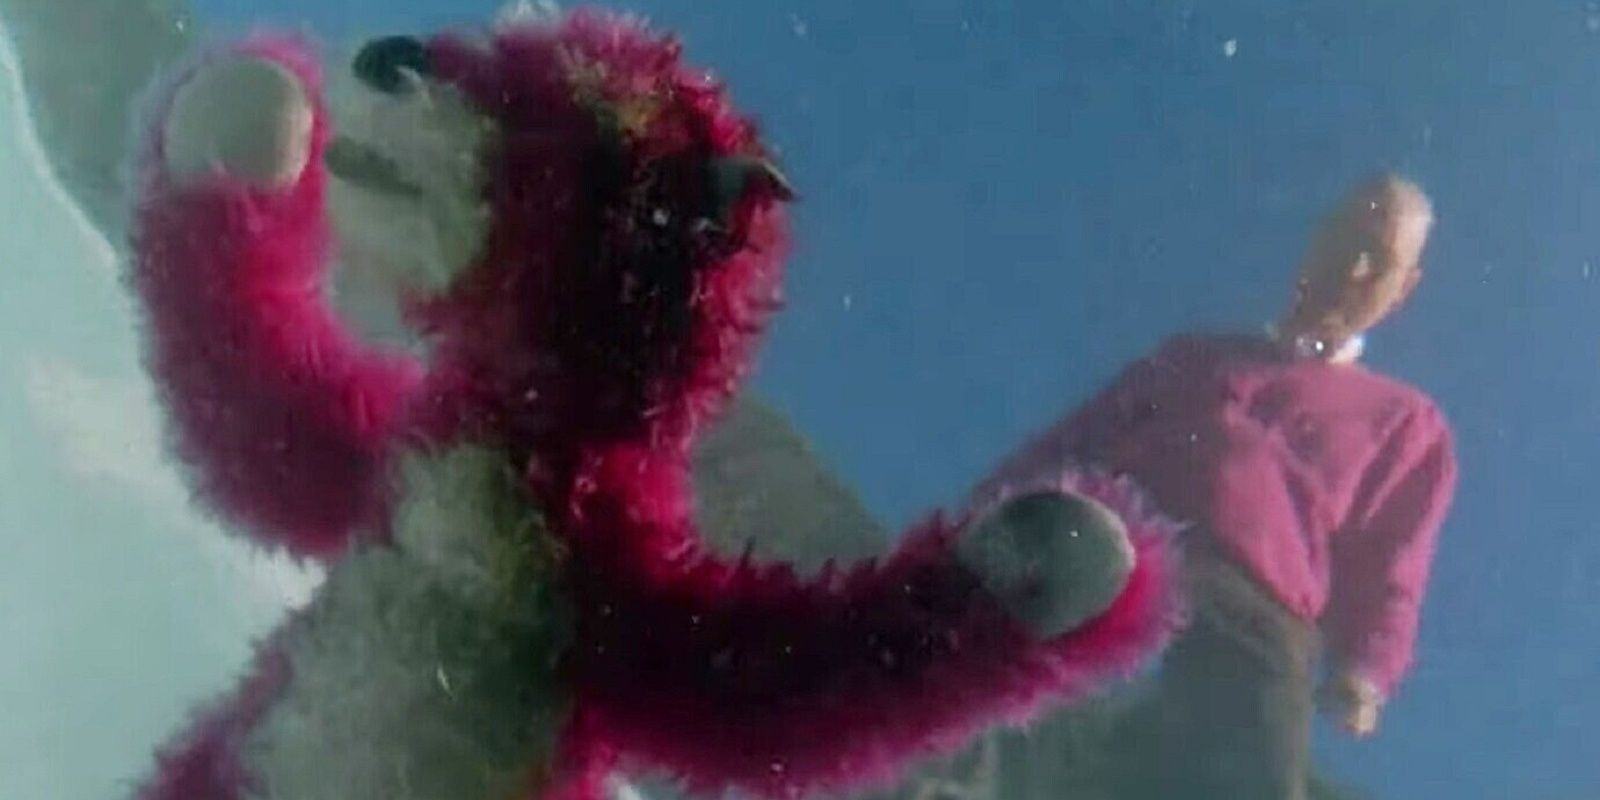 Walter found a pink teddy bear in the pool